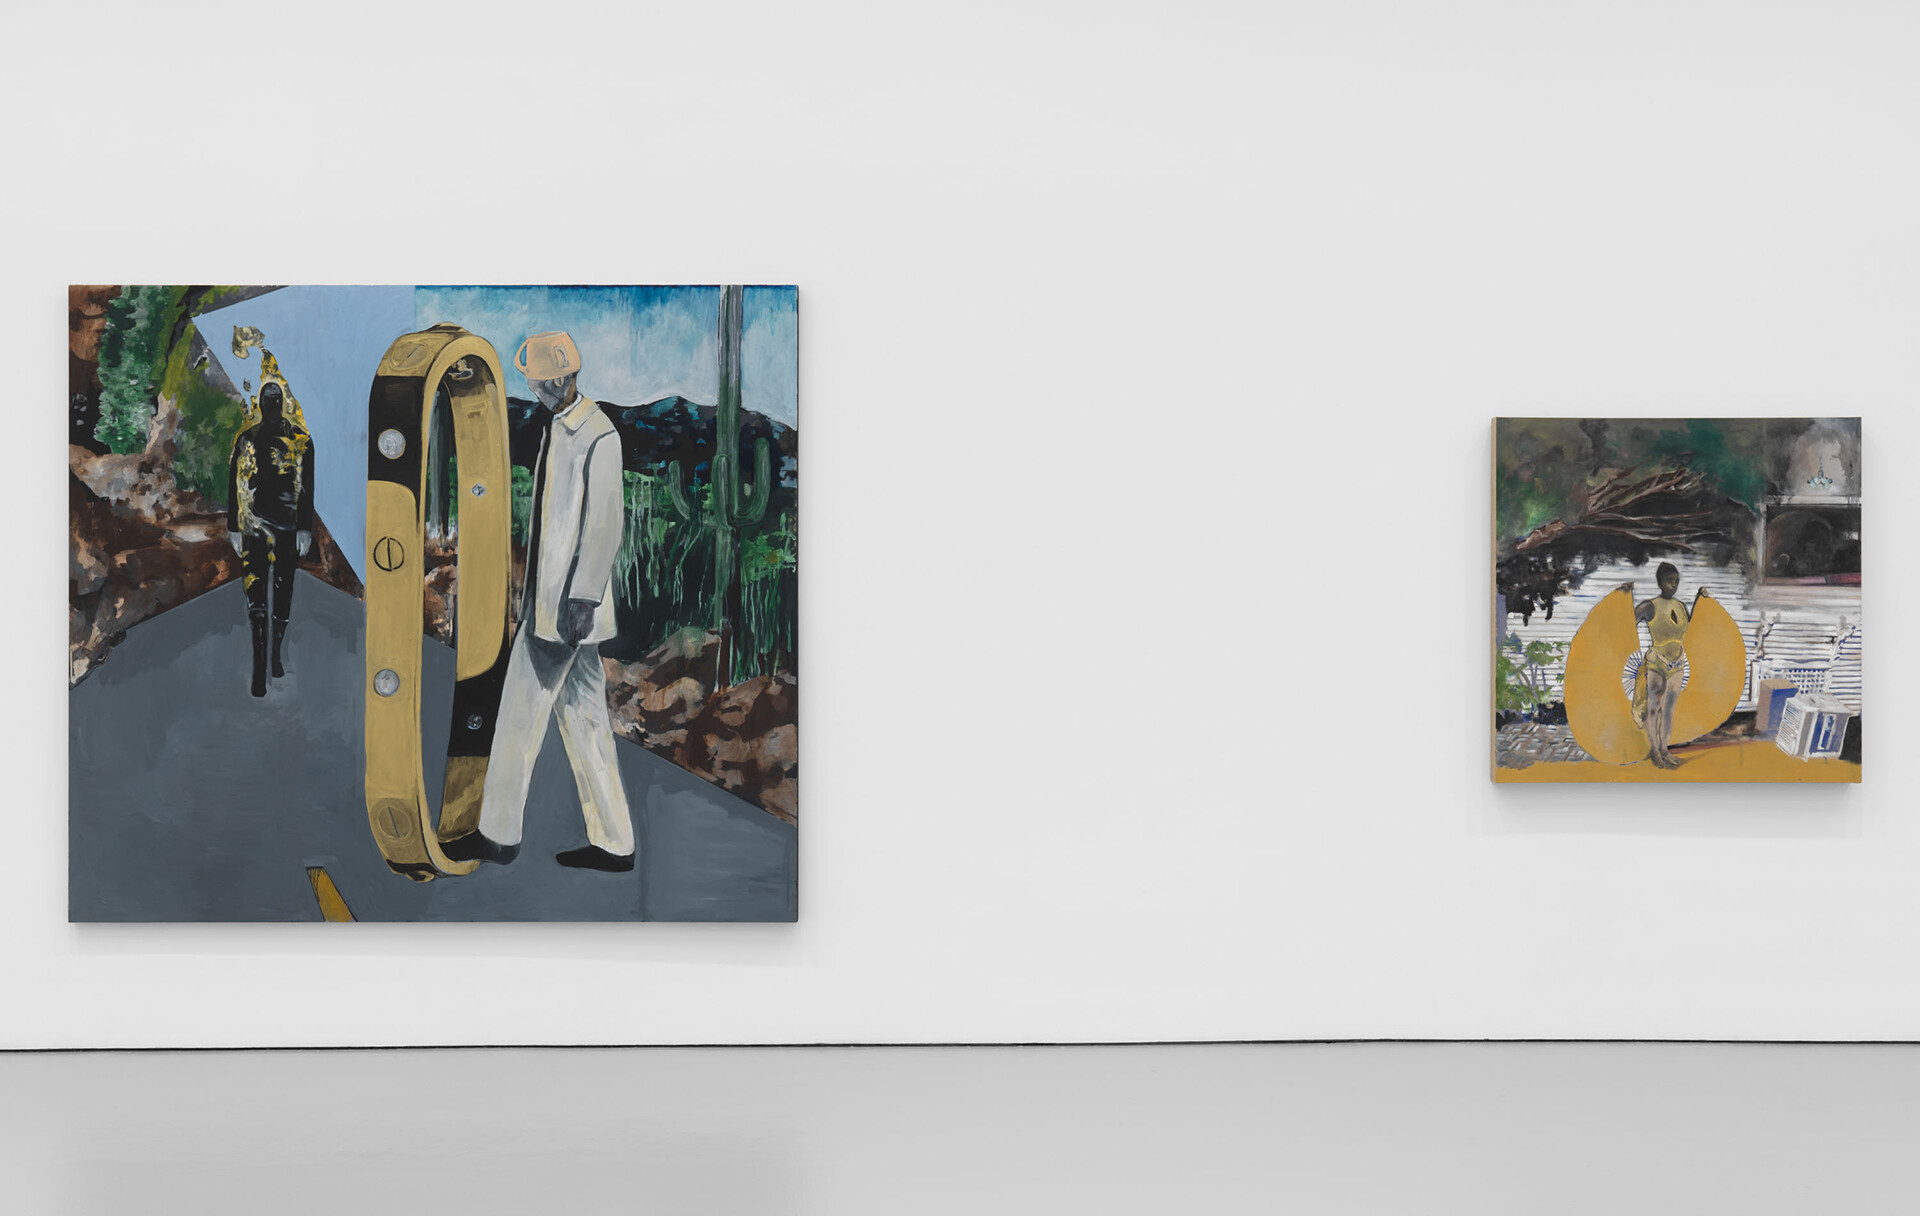 Installation view of the exhibition Noah Davis at David Zwirner in New York, dated 2020.